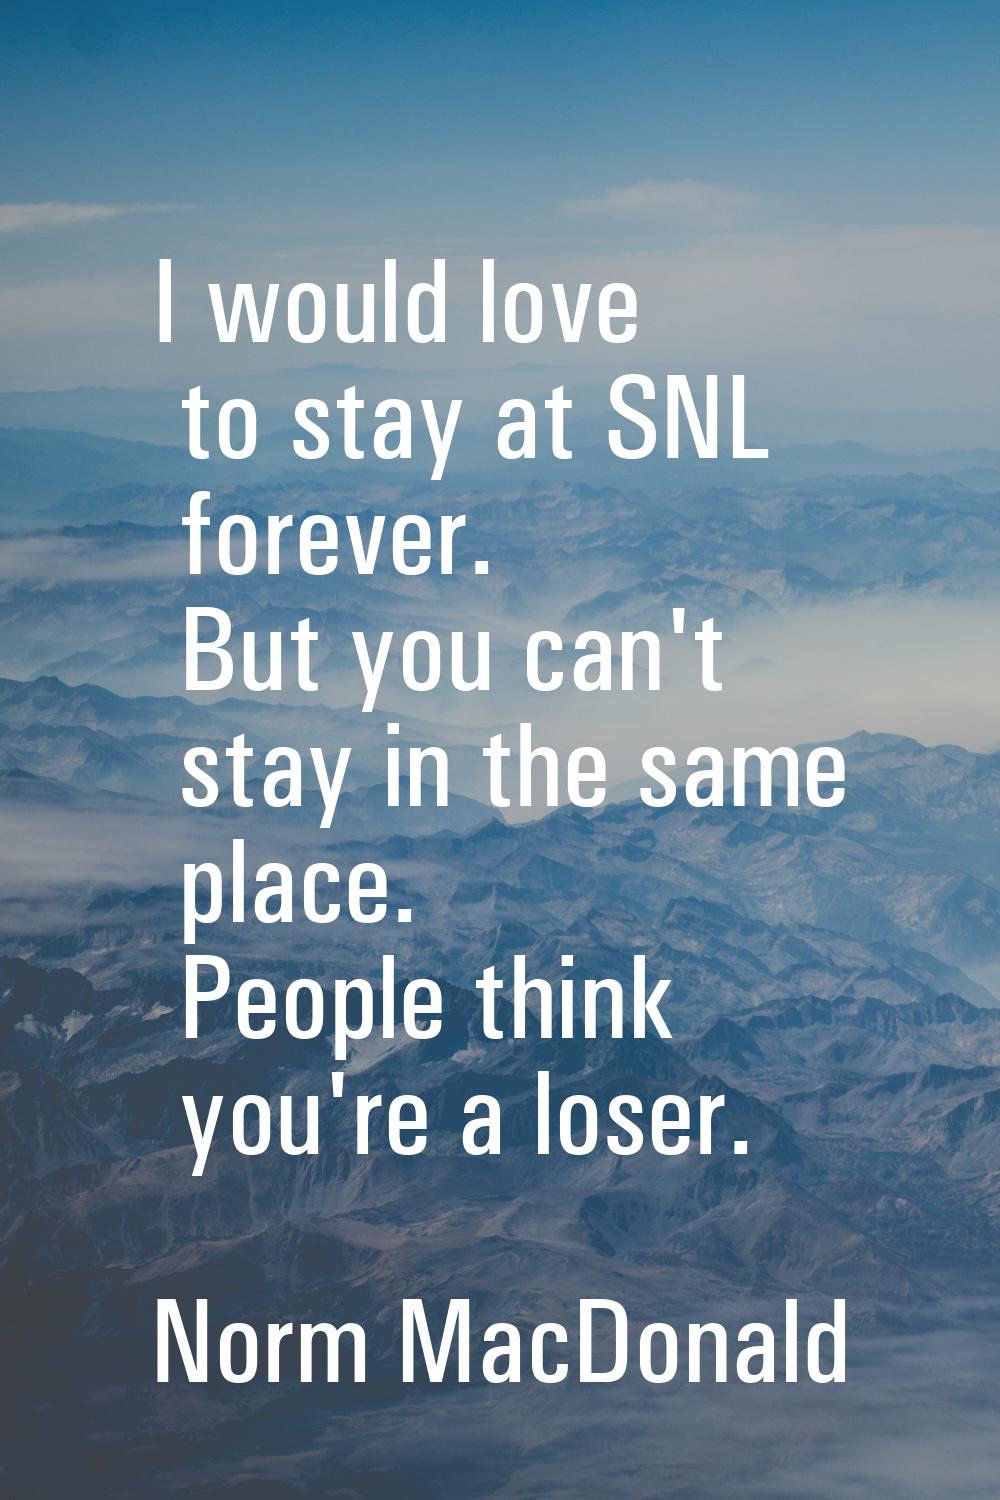 I would love to stay at SNL forever. But you can't stay in the same place. People think you're a lo